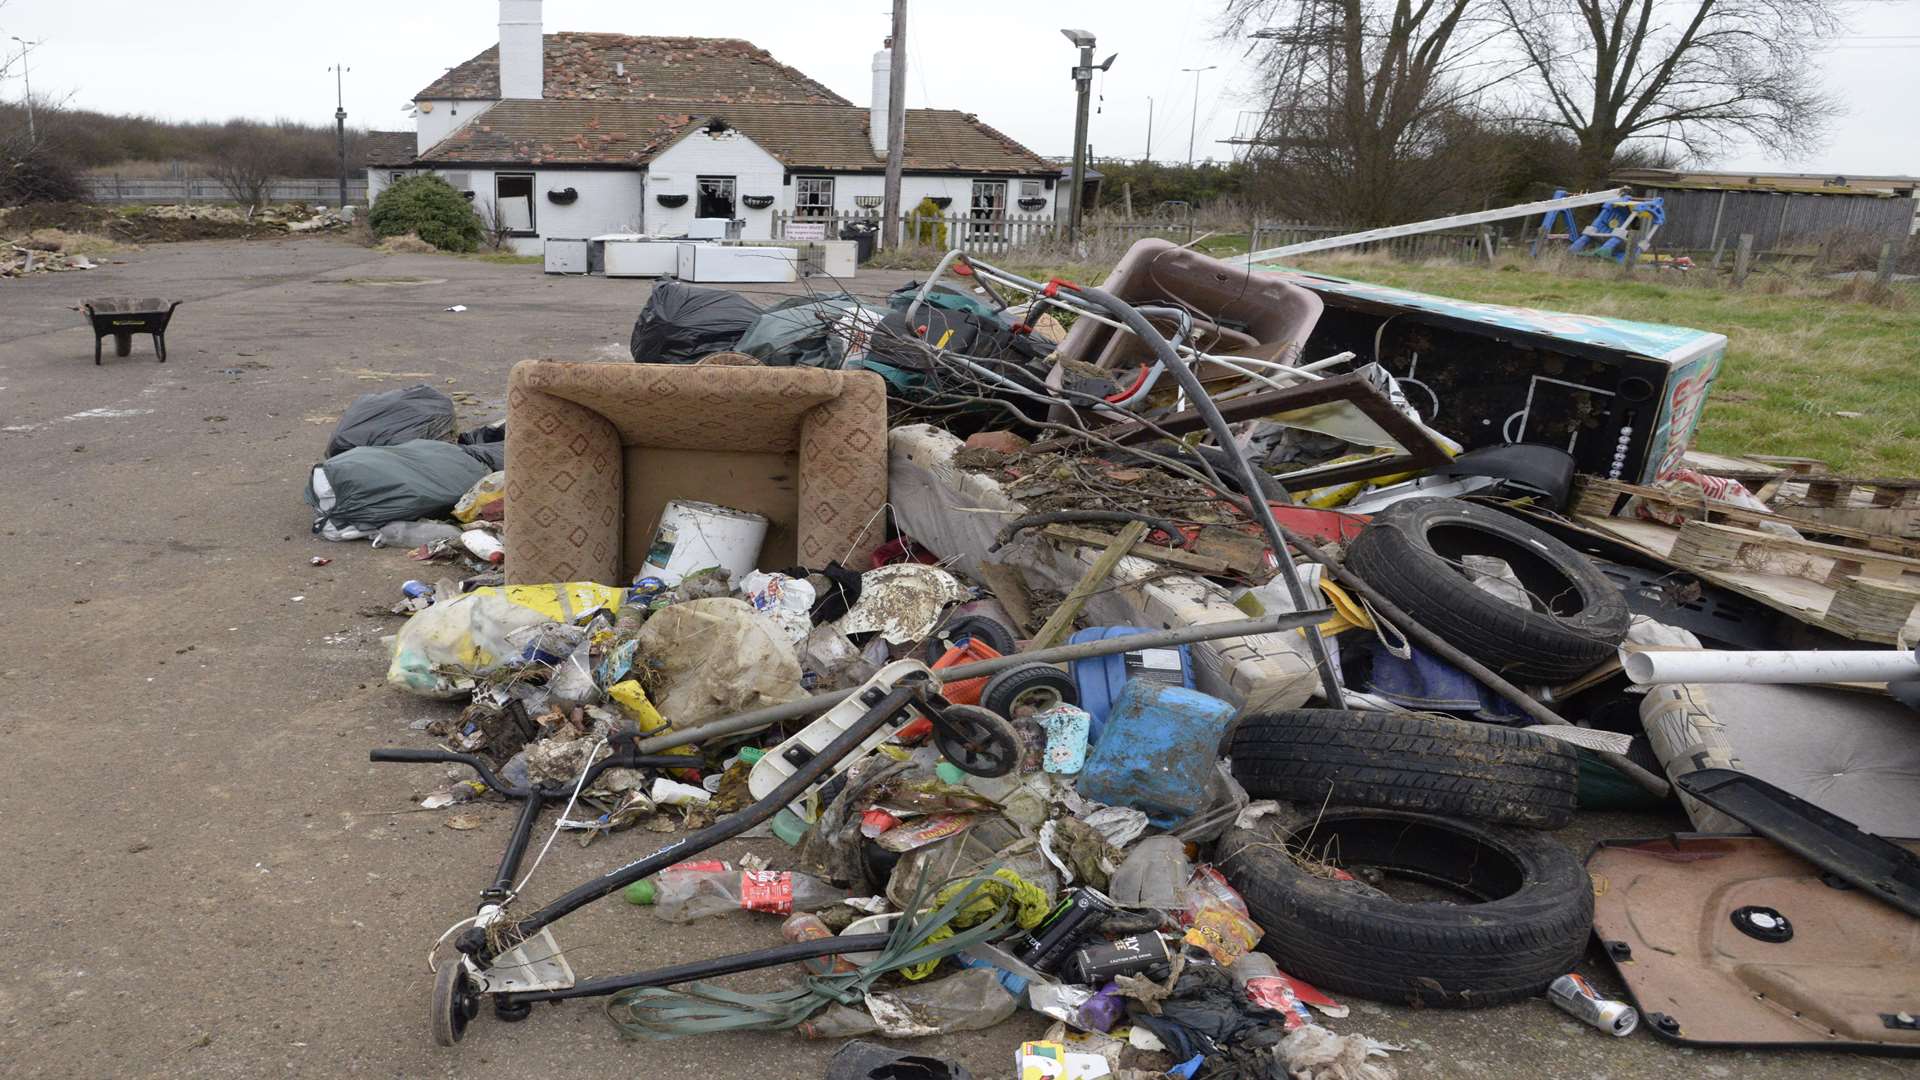 Contractors have begun removing rubbish from around the former public house